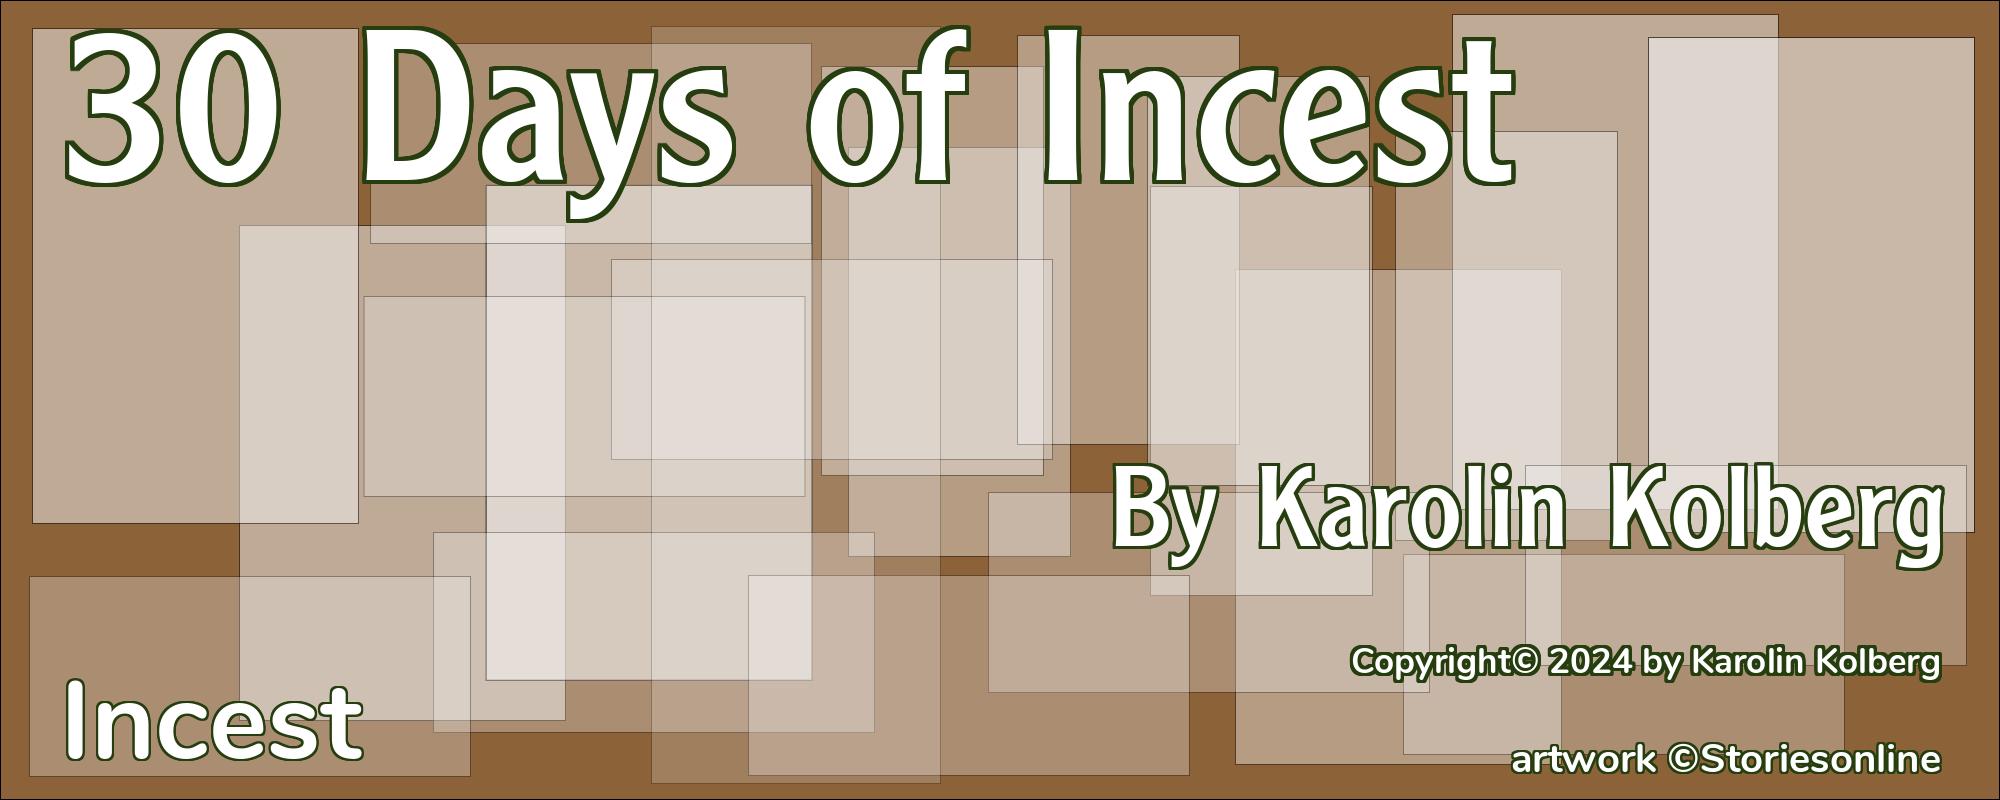 30 Days of Incest - Cover